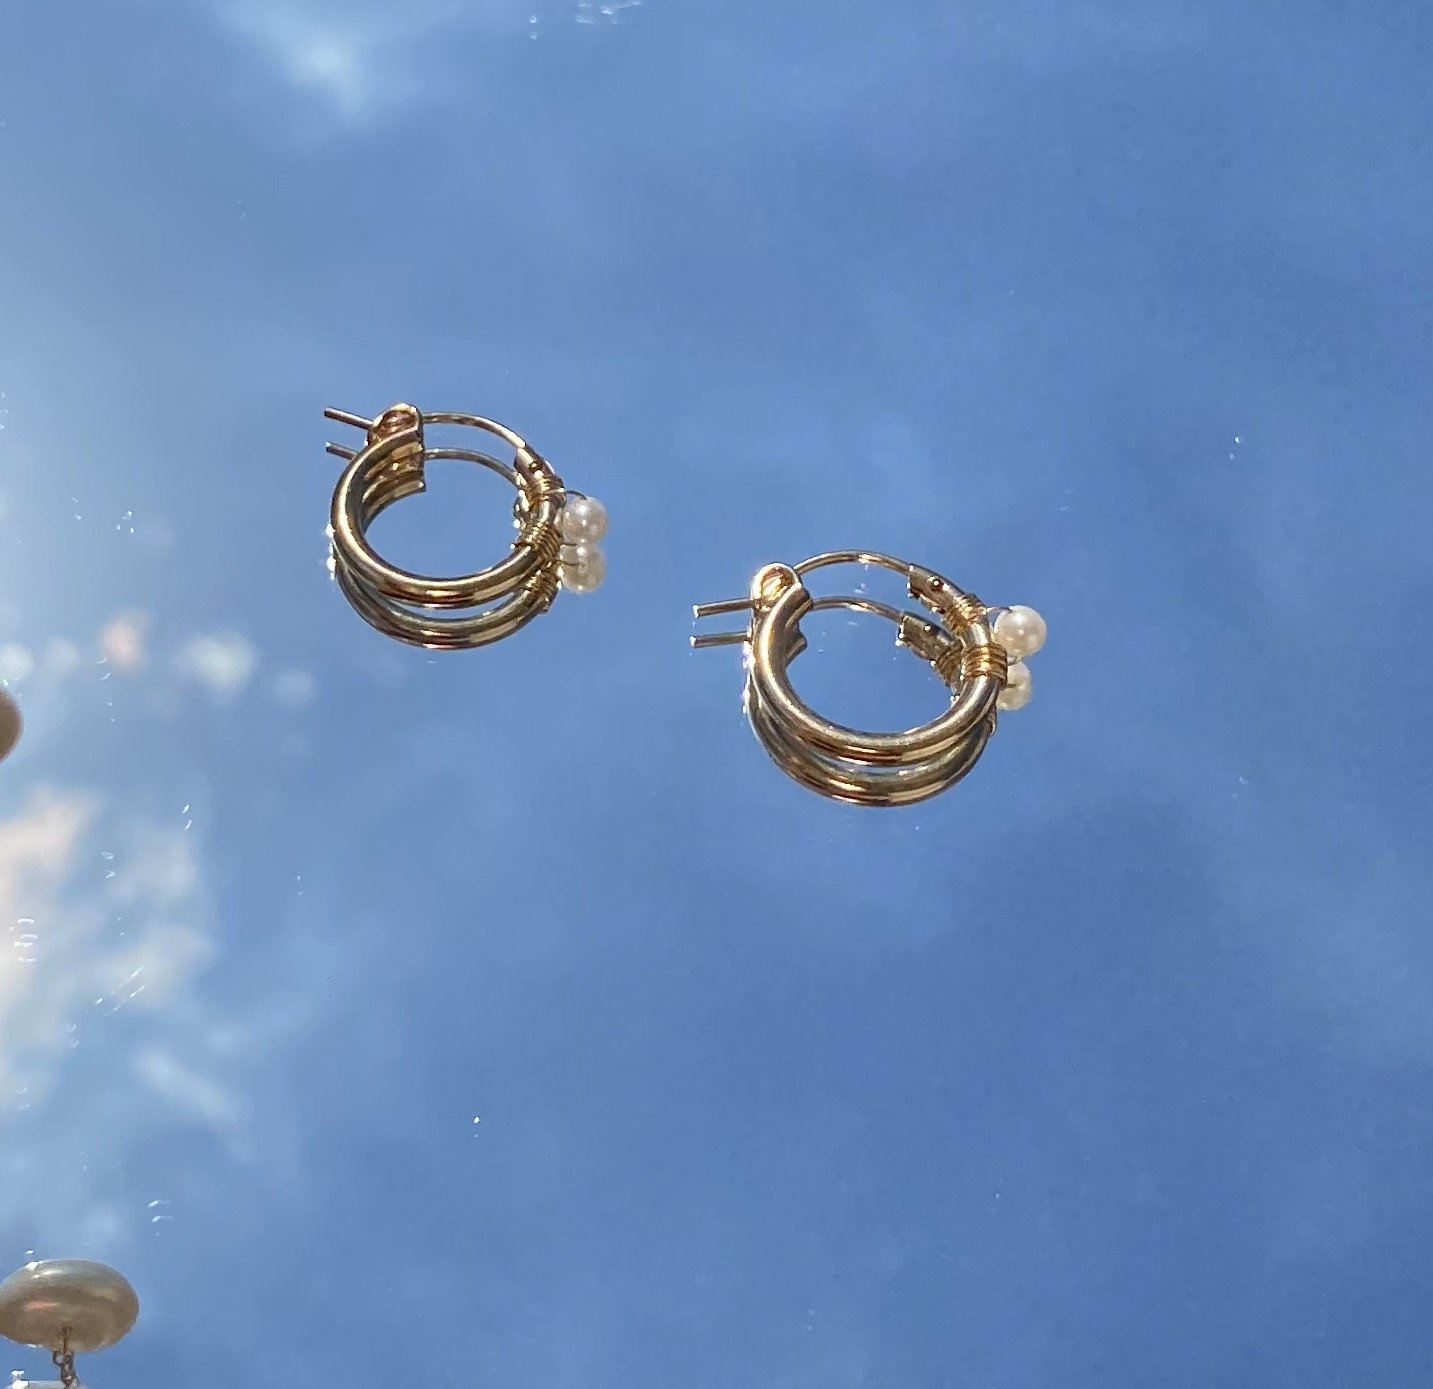 Natalie Earrings by KOZAKH. 12mm snap closure hoop earrings in 14K Gold Filled, featuring a 7mm white potato Pearl.